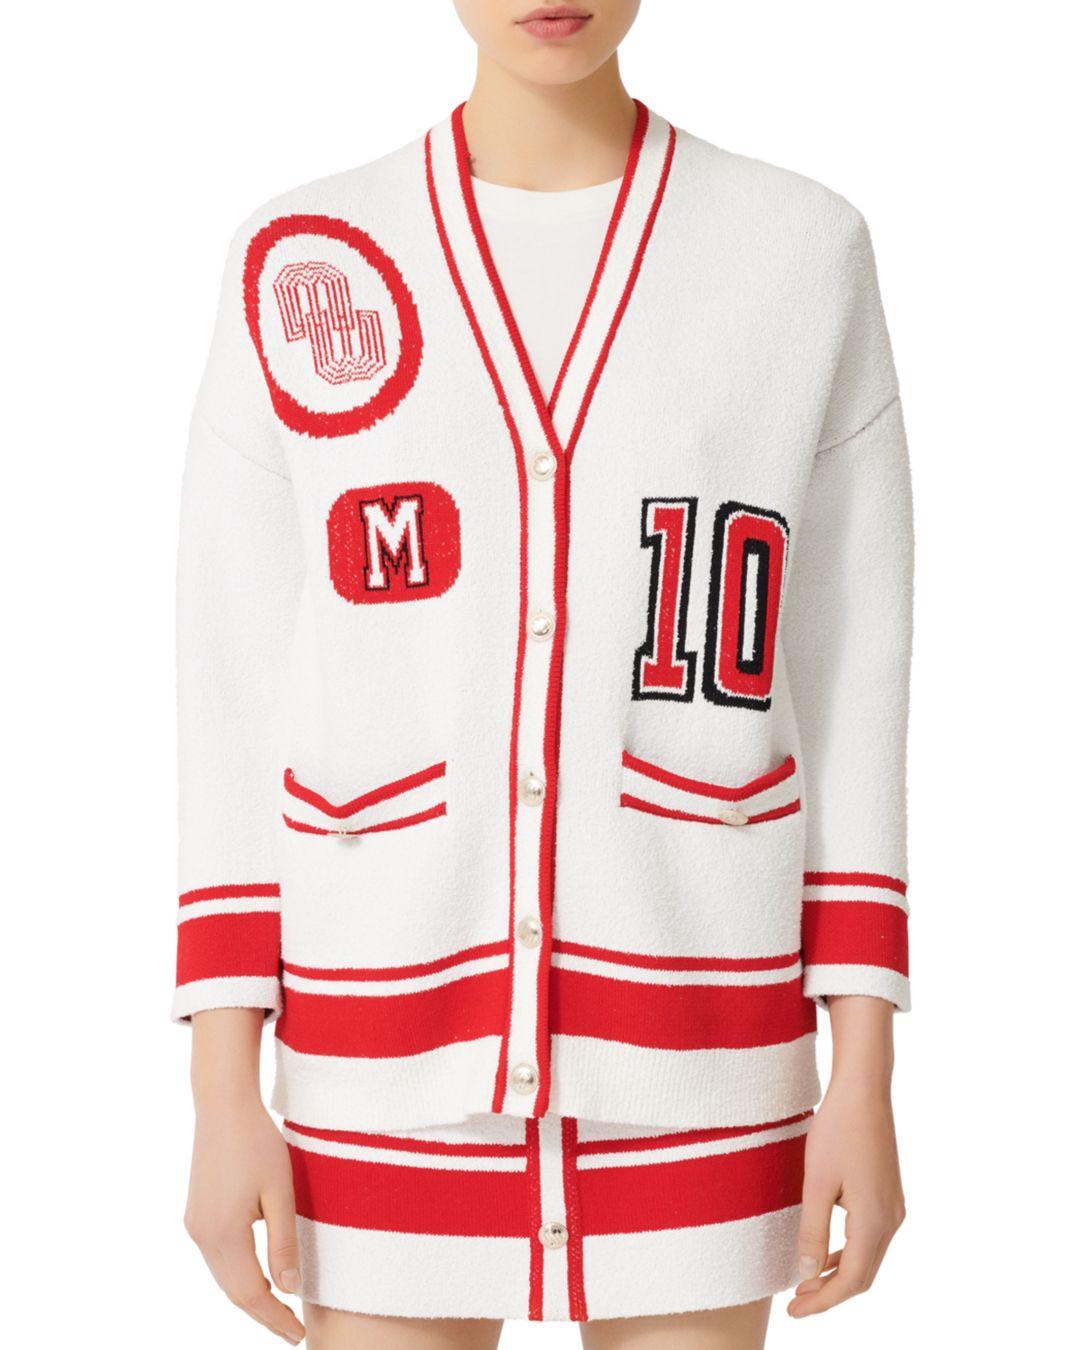 Maje Mallais Varsity - Style Knit Cardigan in Red | Lyst